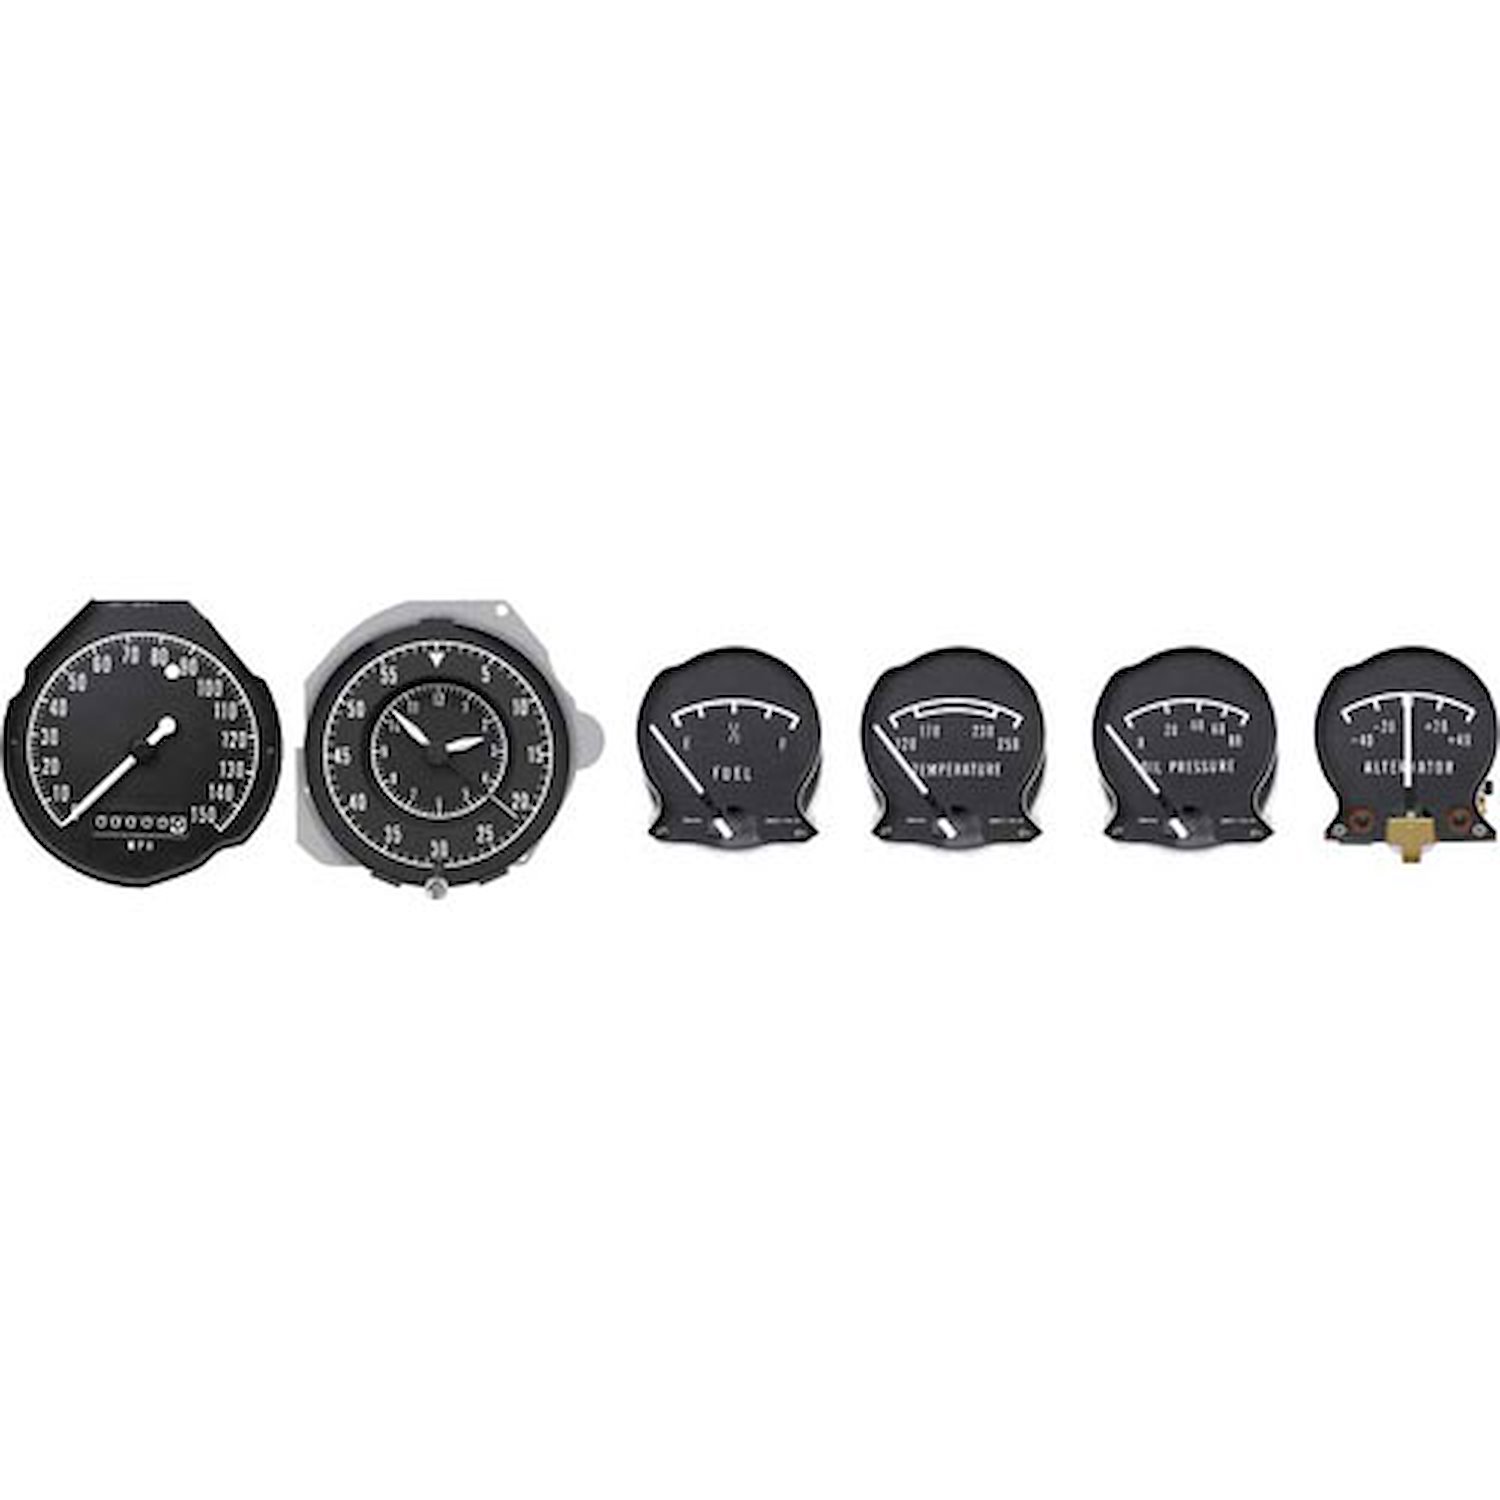 RM4126 In Dash Gauge Set 1968-70 Charger, Coronet, GTX, Road Runner; With Clock, Without Tach